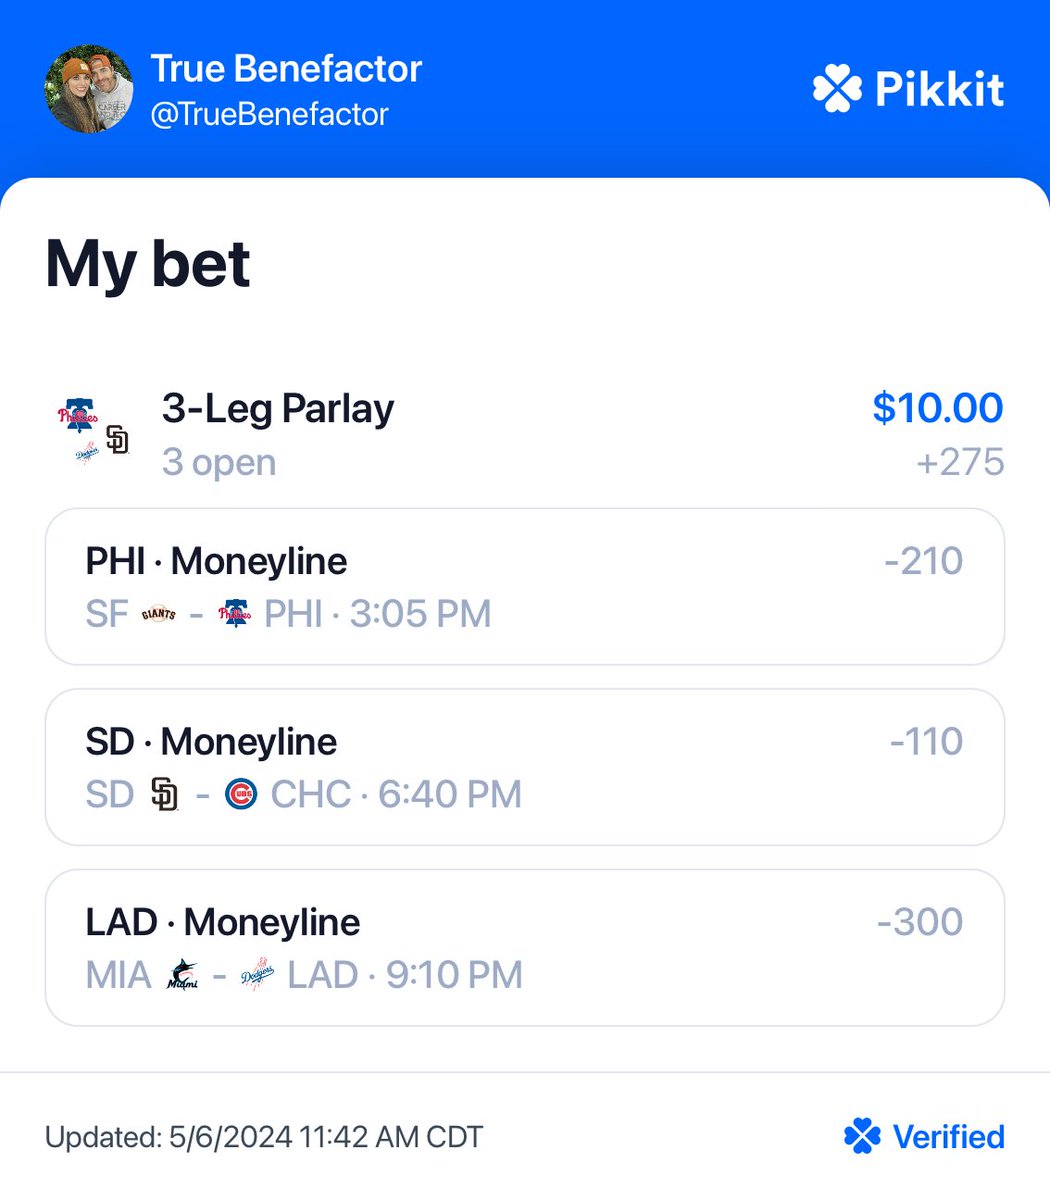 PARLAY GIVEAWAY #2
🔥🔥🔥
$10 to a follower if this hits🍀🍀🍀
🔥🔥🔥
✅Follow
✅Repost
✅Like
✅Comment